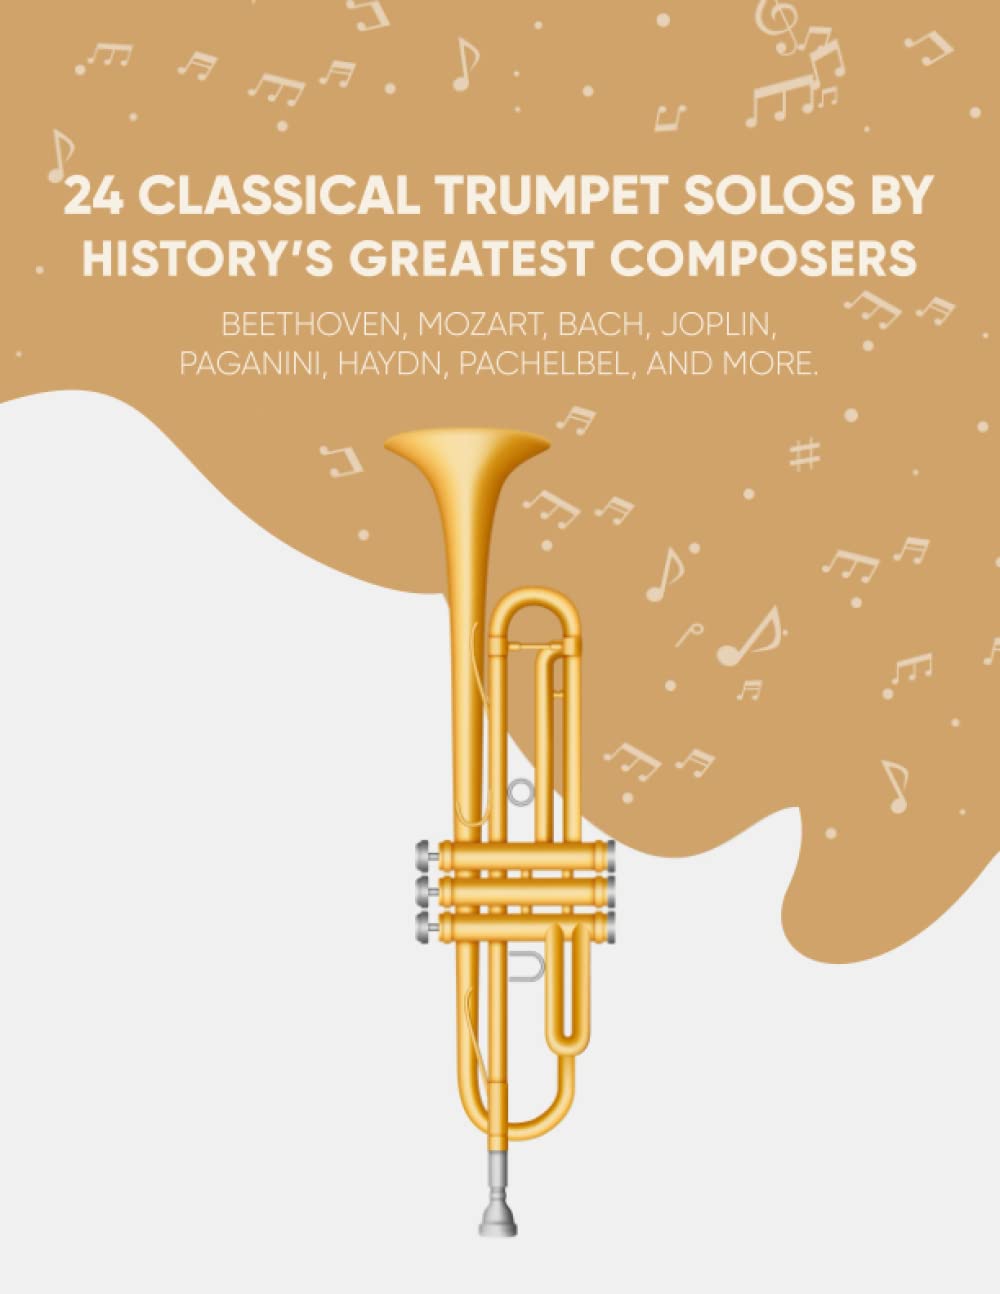 24 Classical Trumpet Solos By History's Greatest Composers